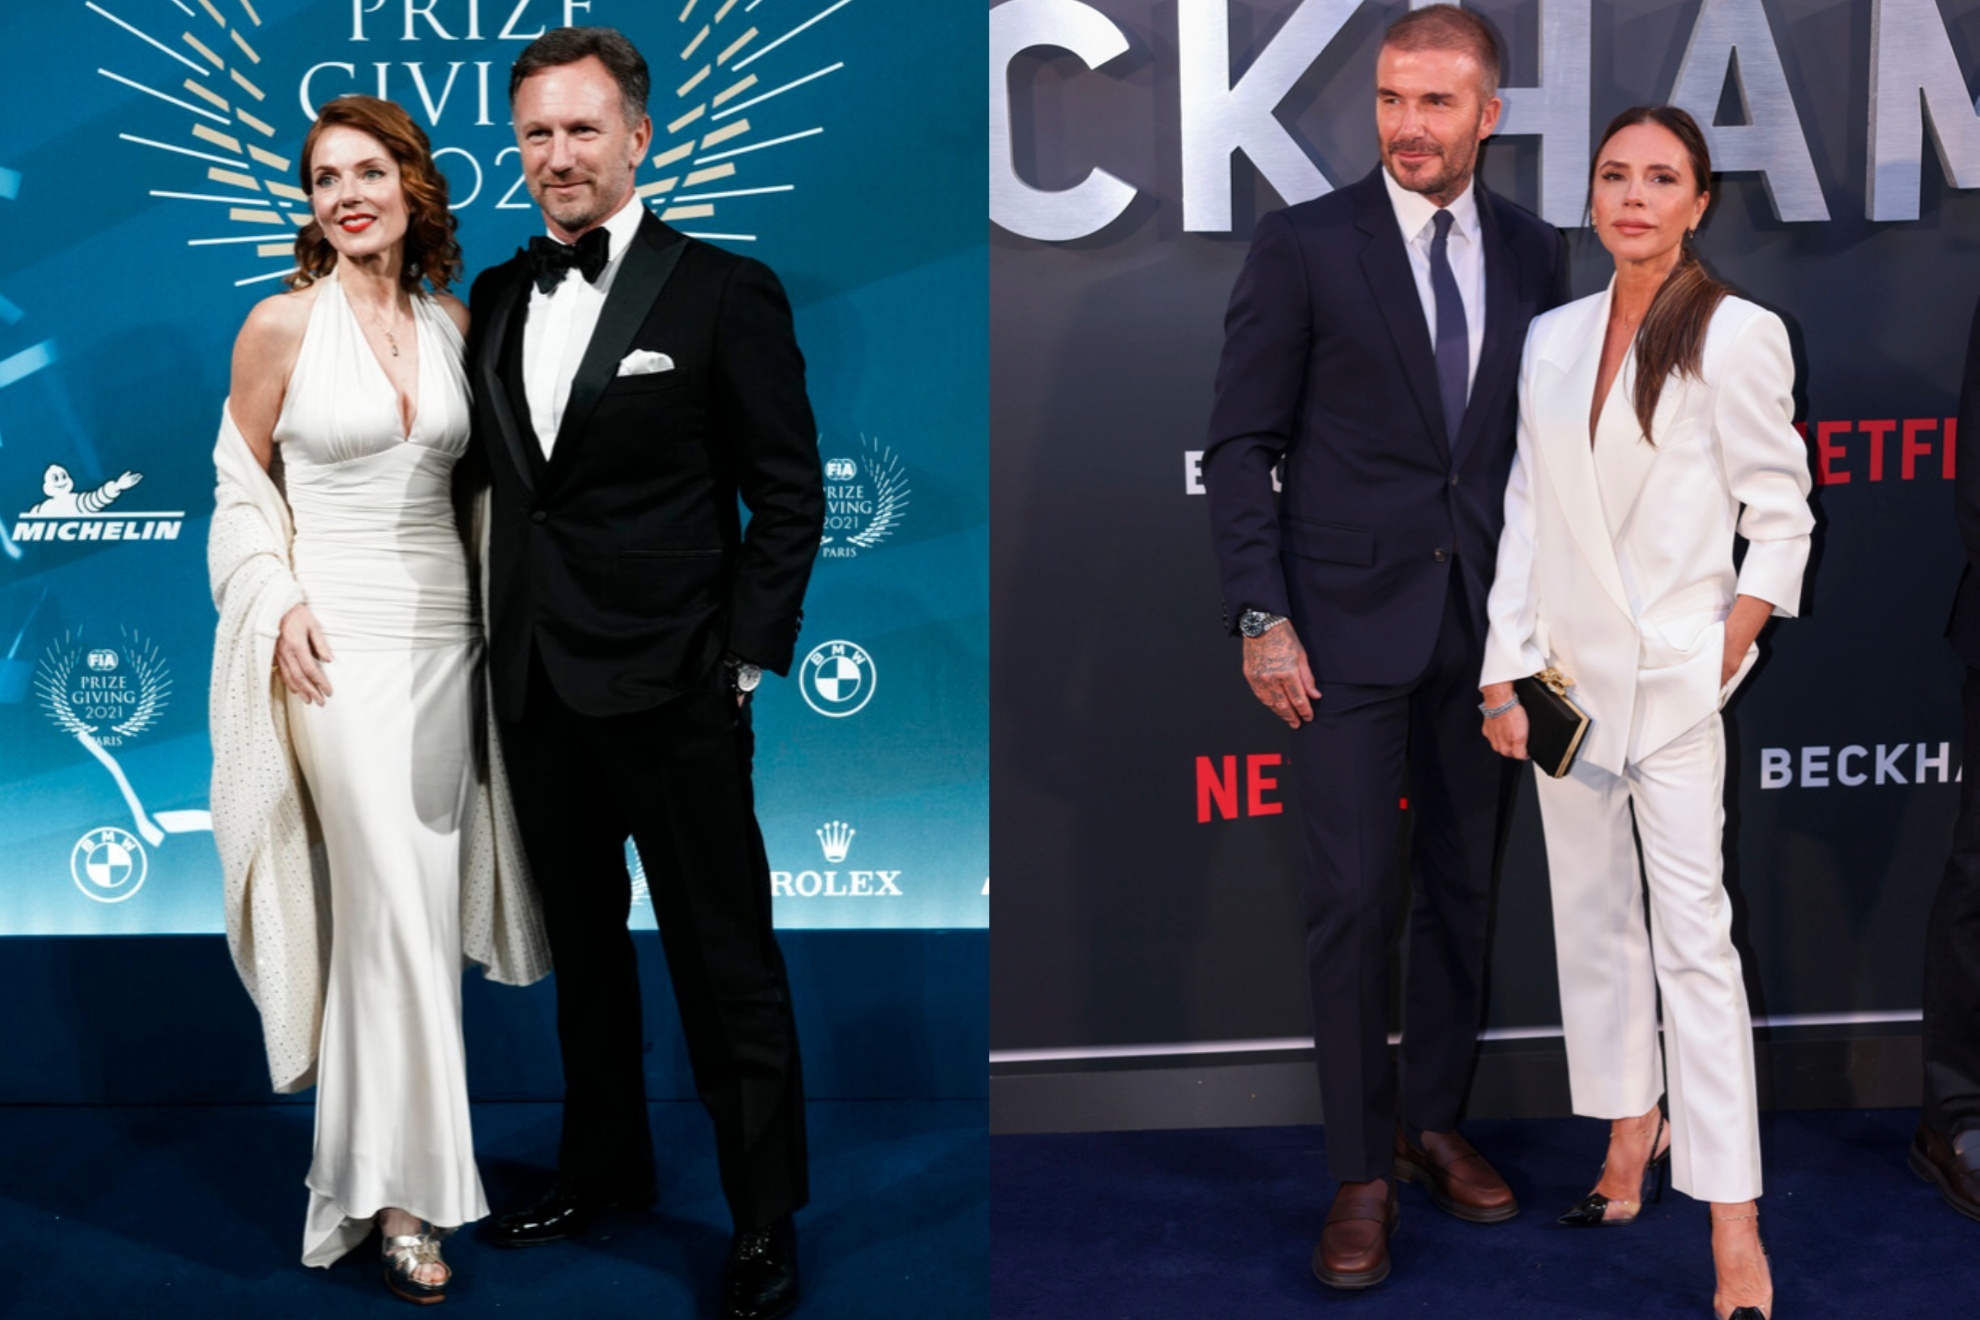 Geri Halliwell and Christian Horner (R) follow in the footsteps of David and Victoria Beckham.